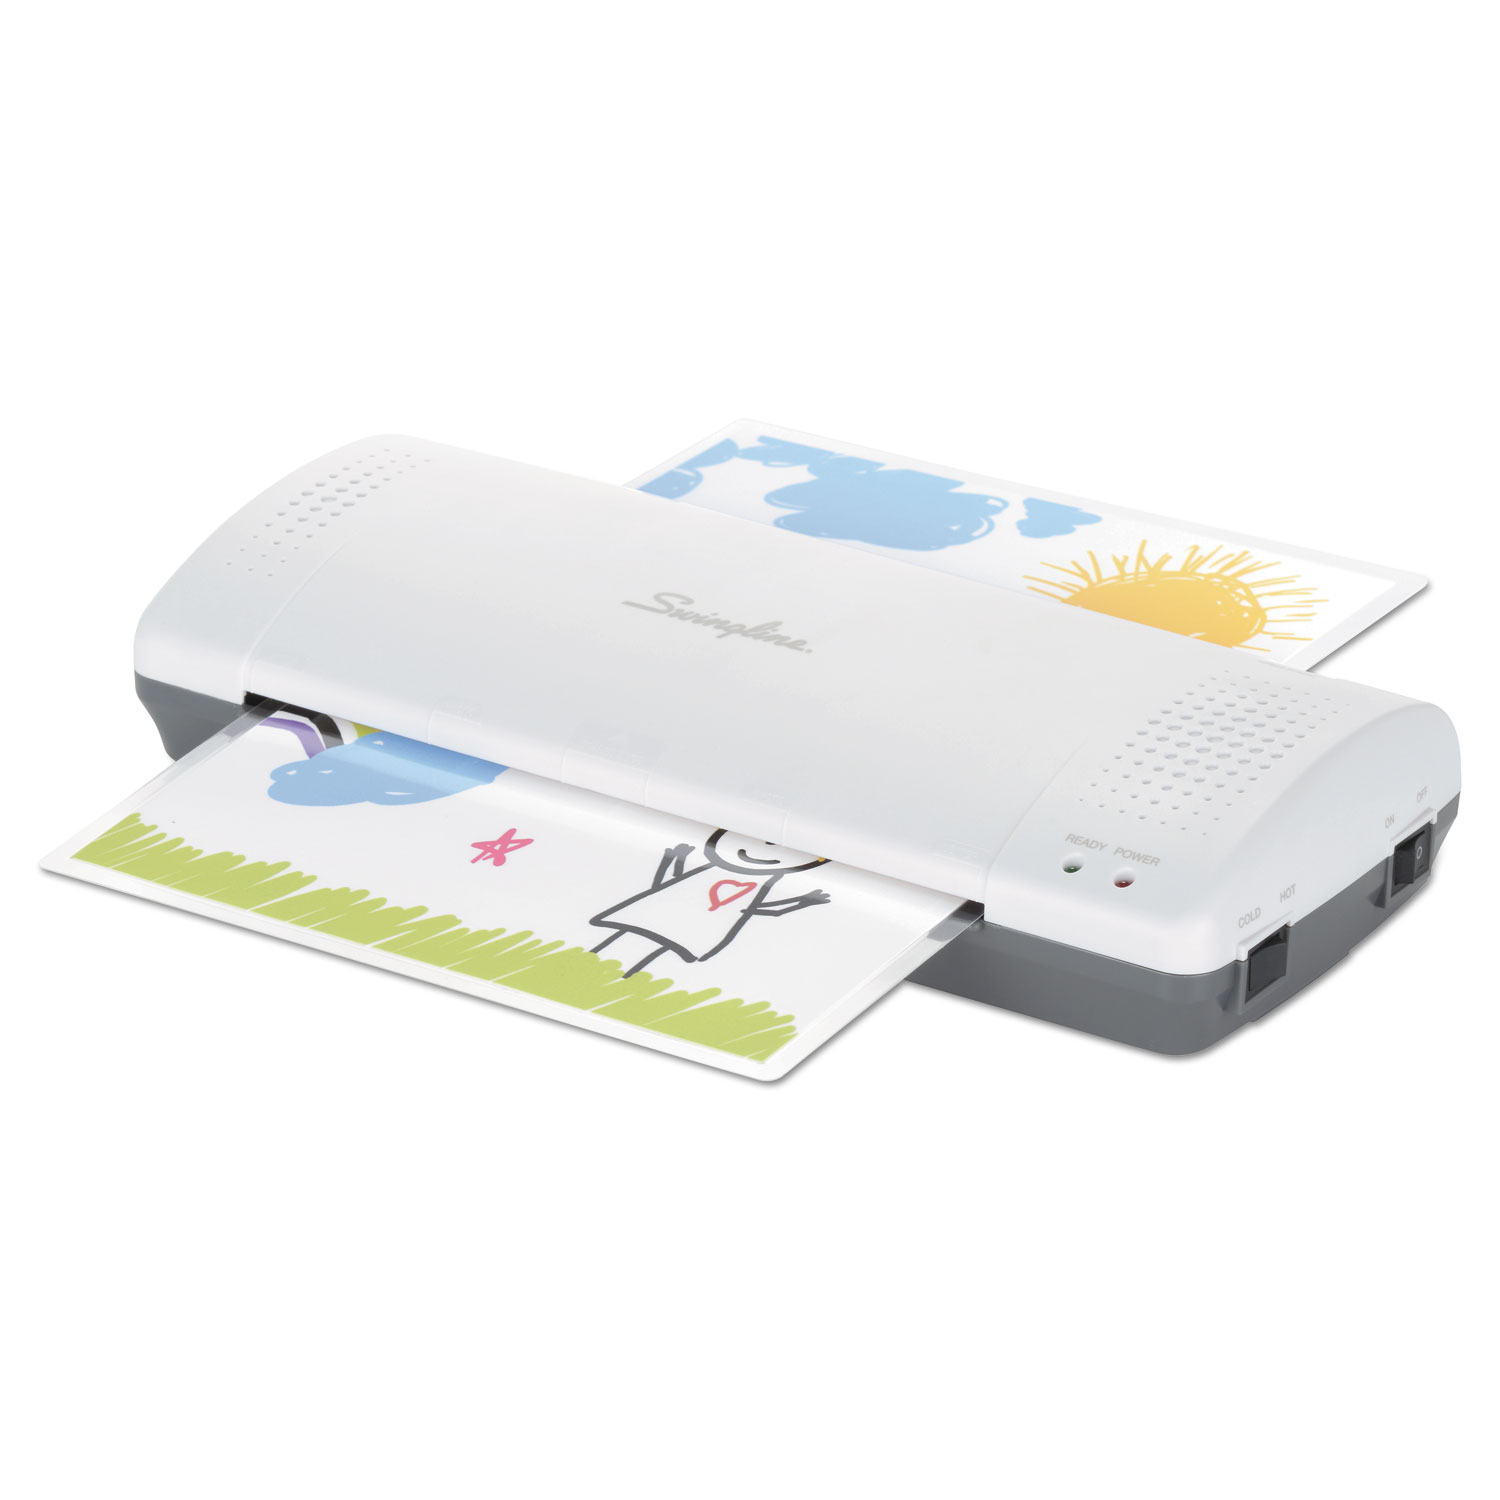  GBC 1701857CM Inspire Plus Thermal Pouch Laminator, 9 Max Document Width, 5 mil Max Document Thickness (SWI1701857CM) 